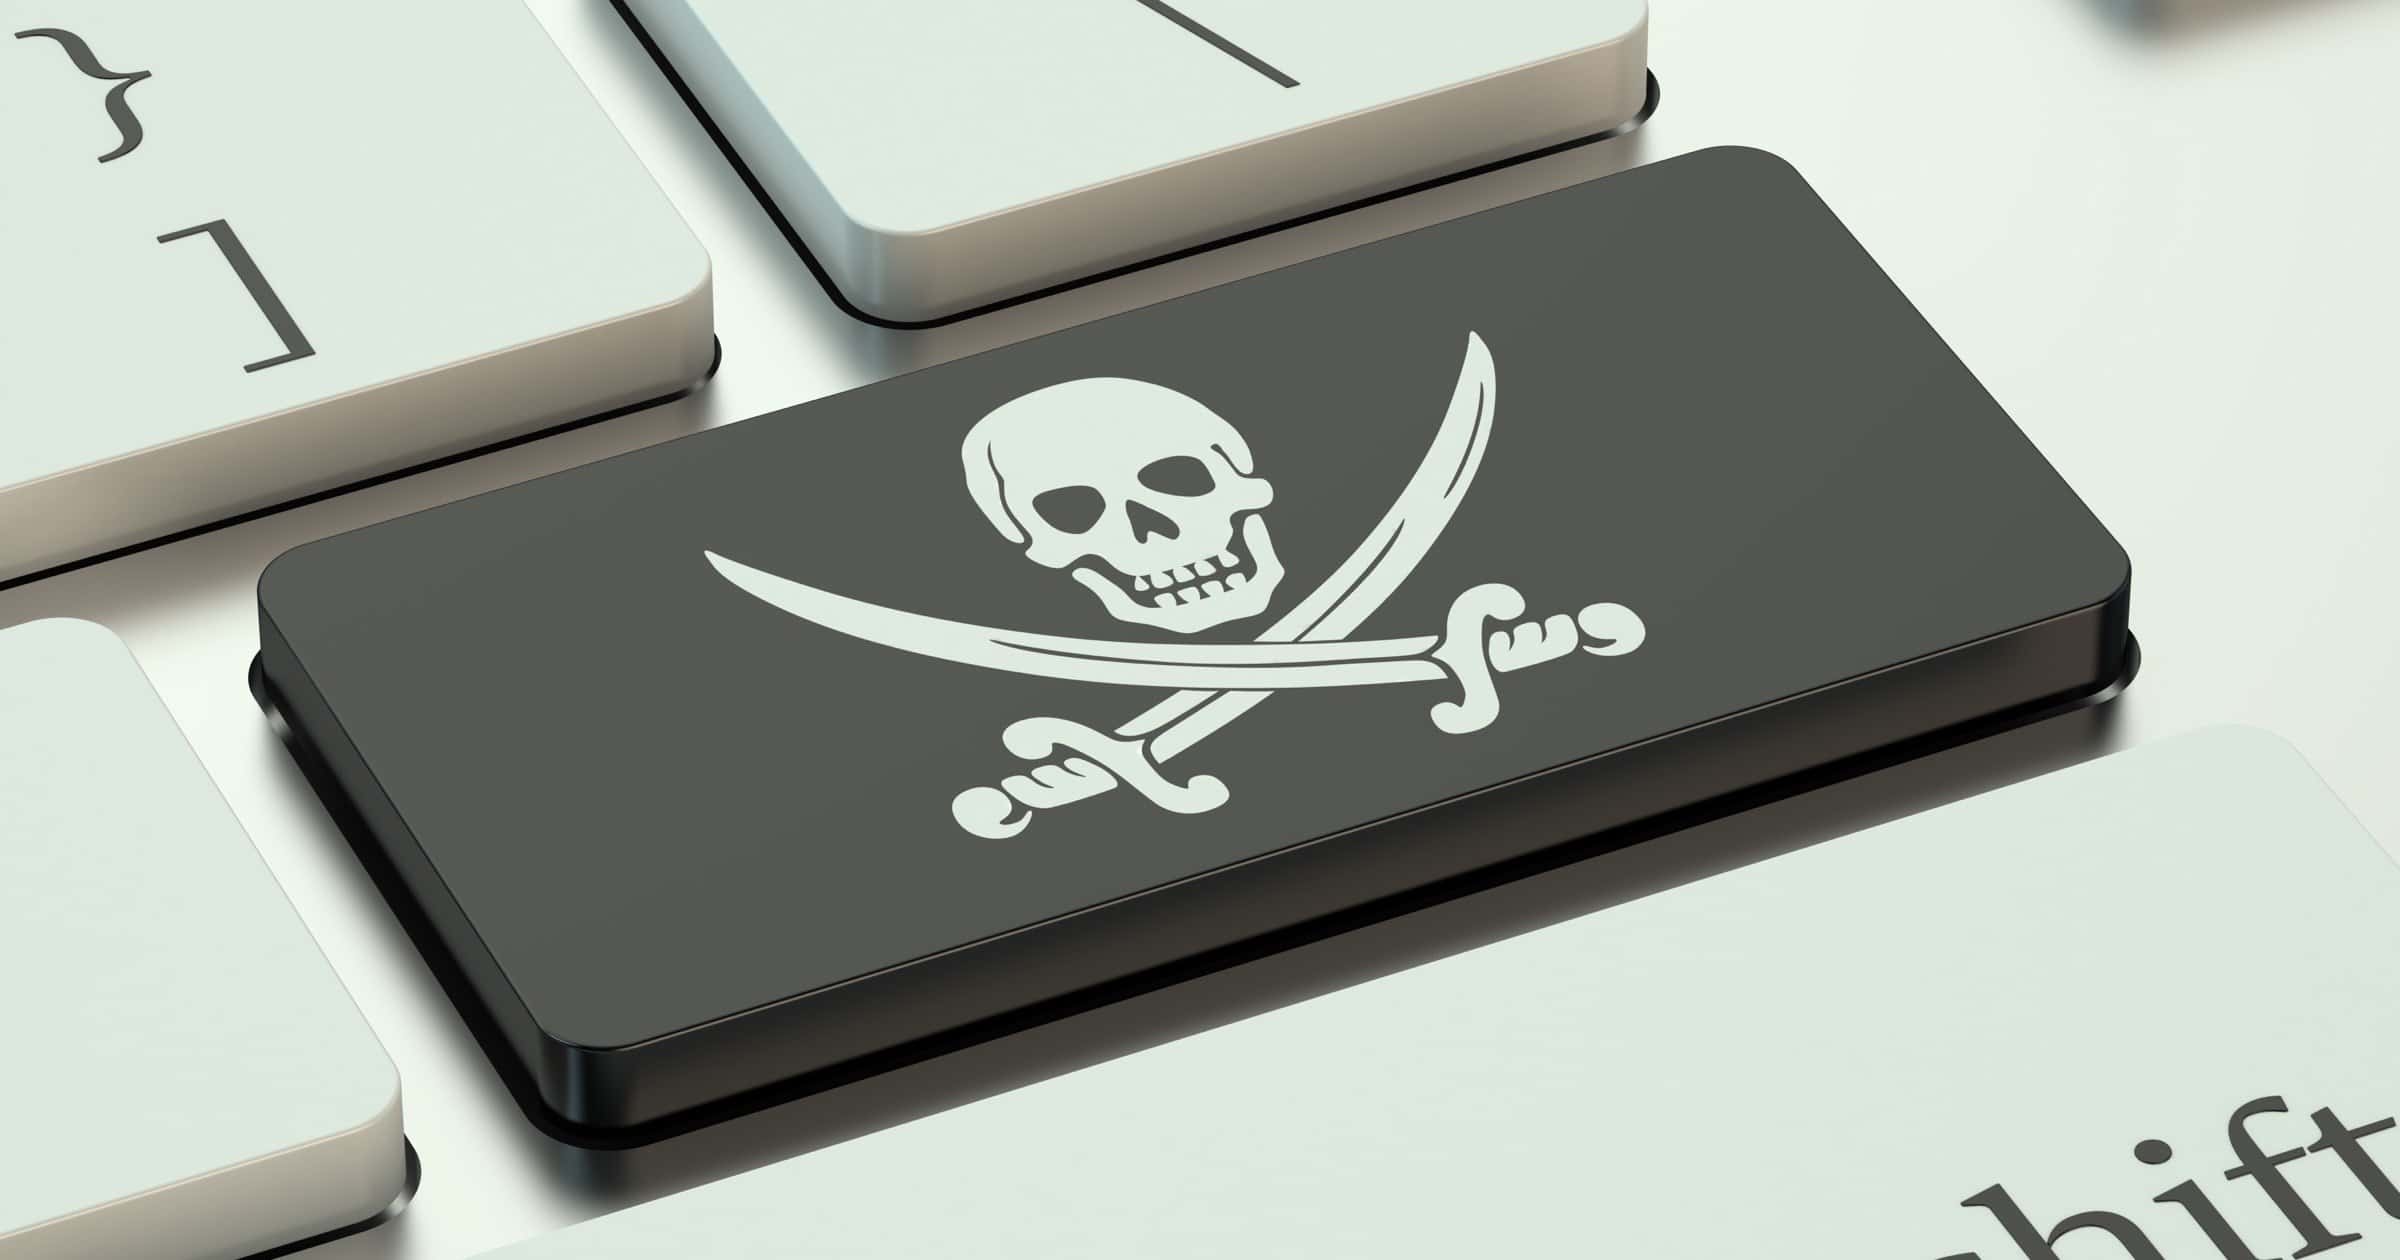 New Malware Infects Software Pirates and Blocks The Pirate Bay